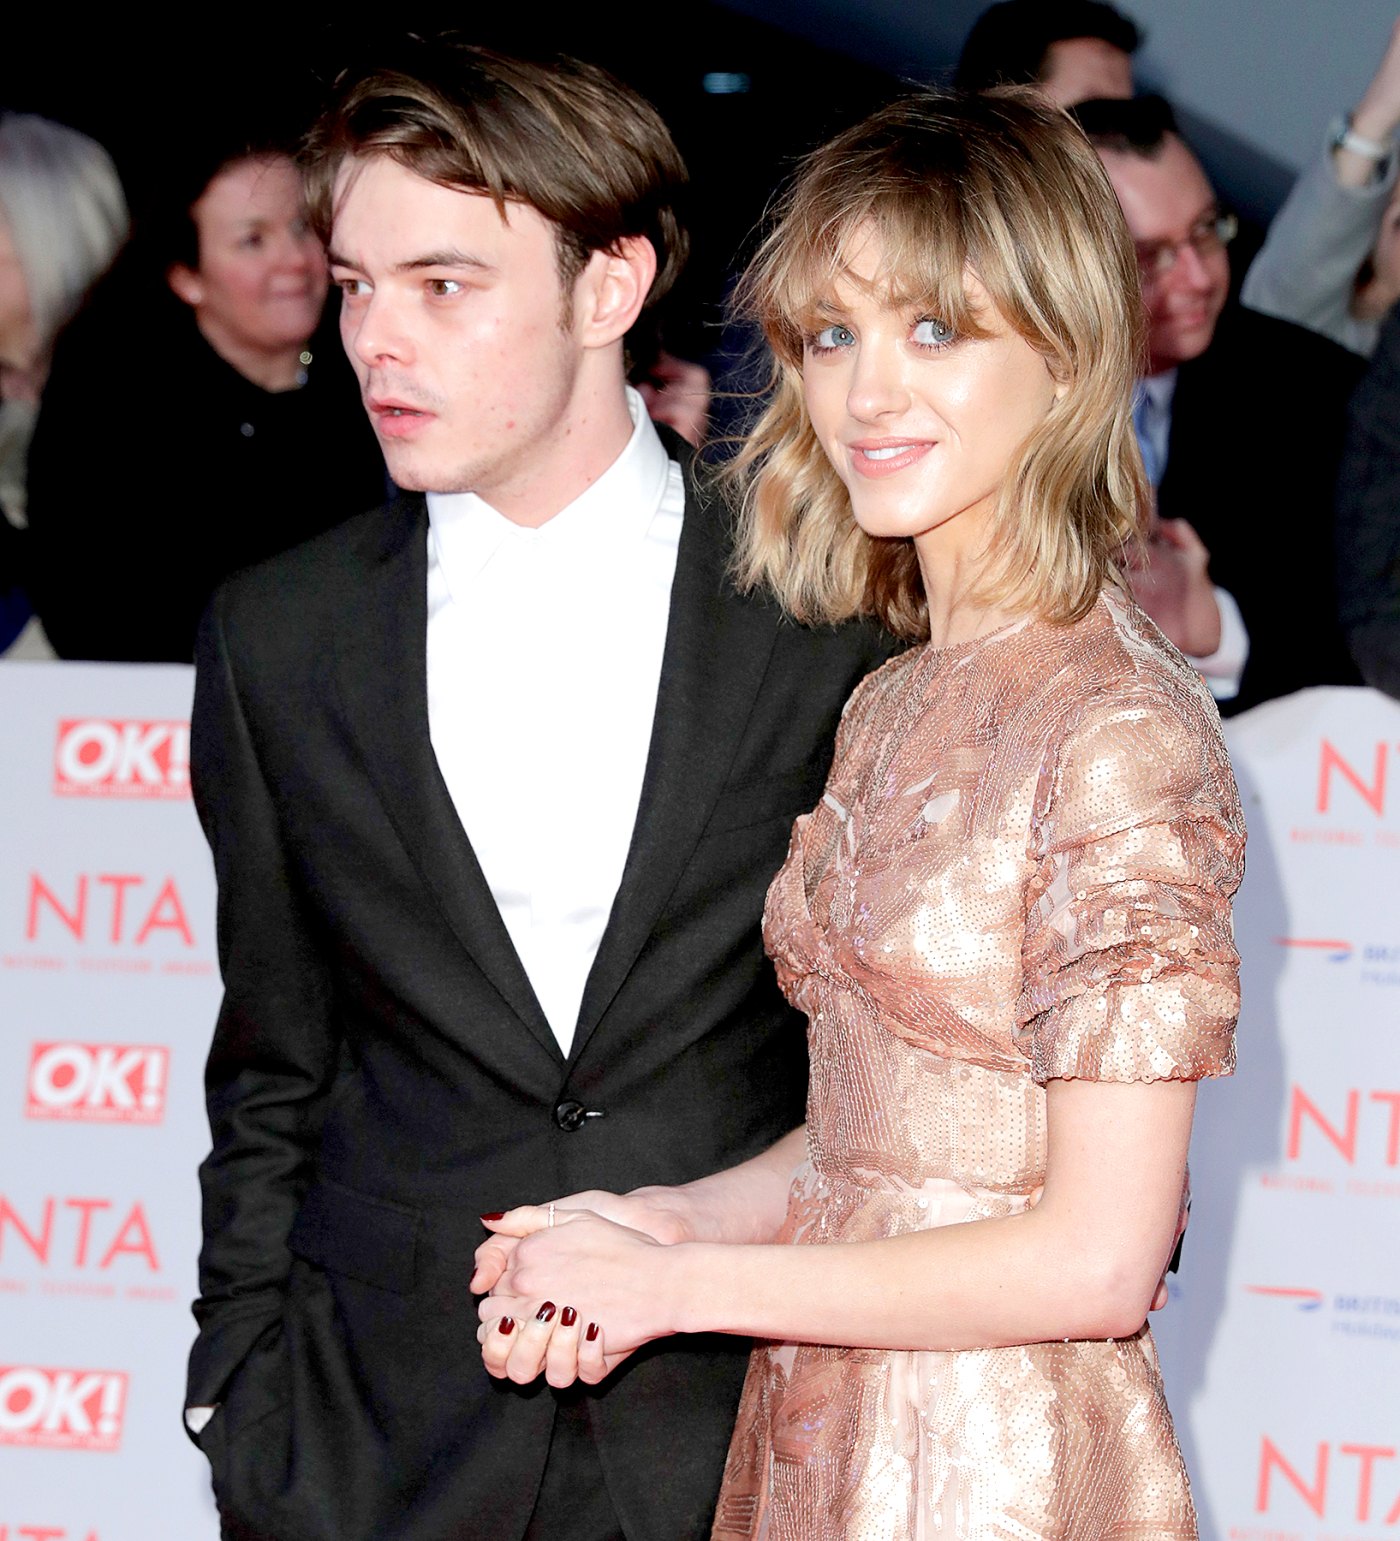 Charlie Heaton and Natalia Dyer Attend London Award Show Together